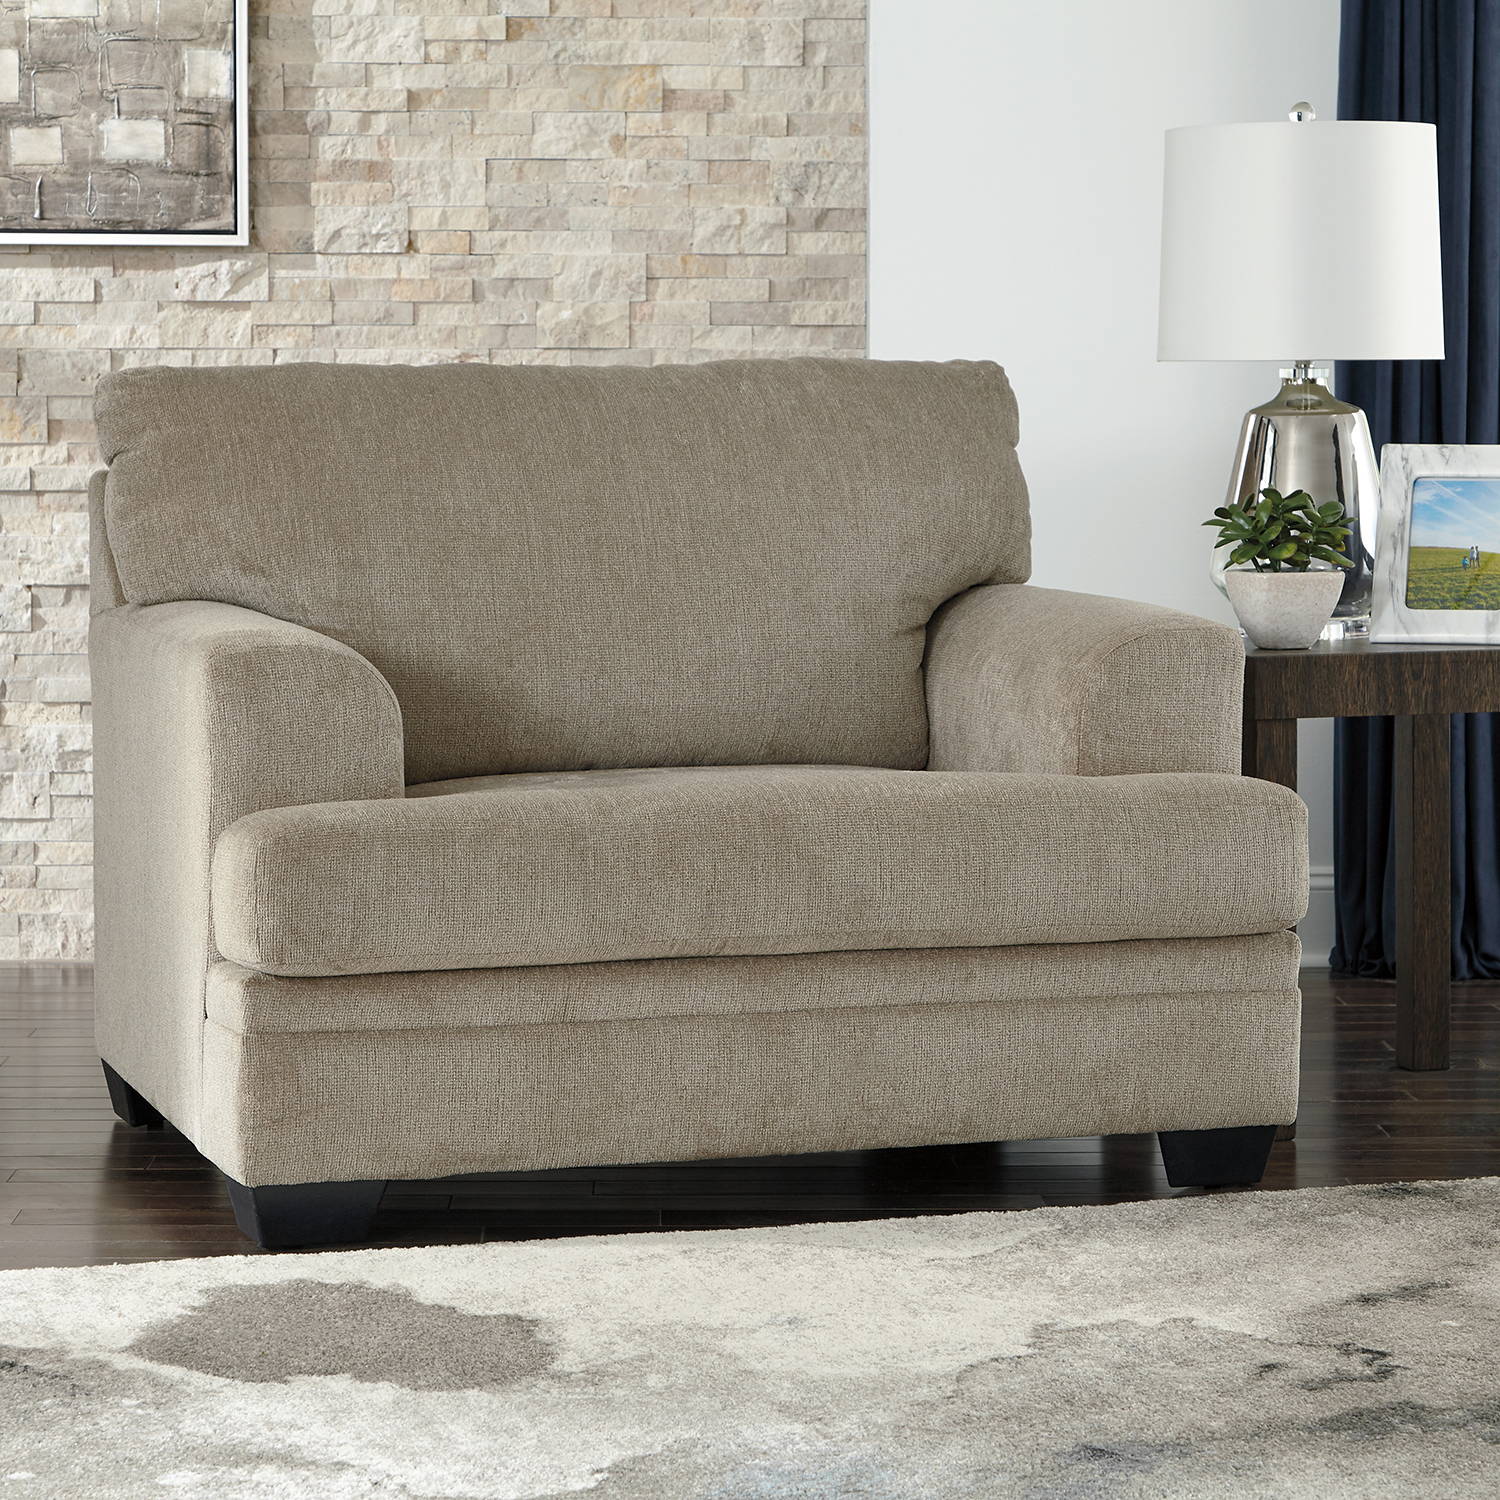 Ashley Brown Sofa Chair in a Living Room. Shop Sofa Chairs Now!